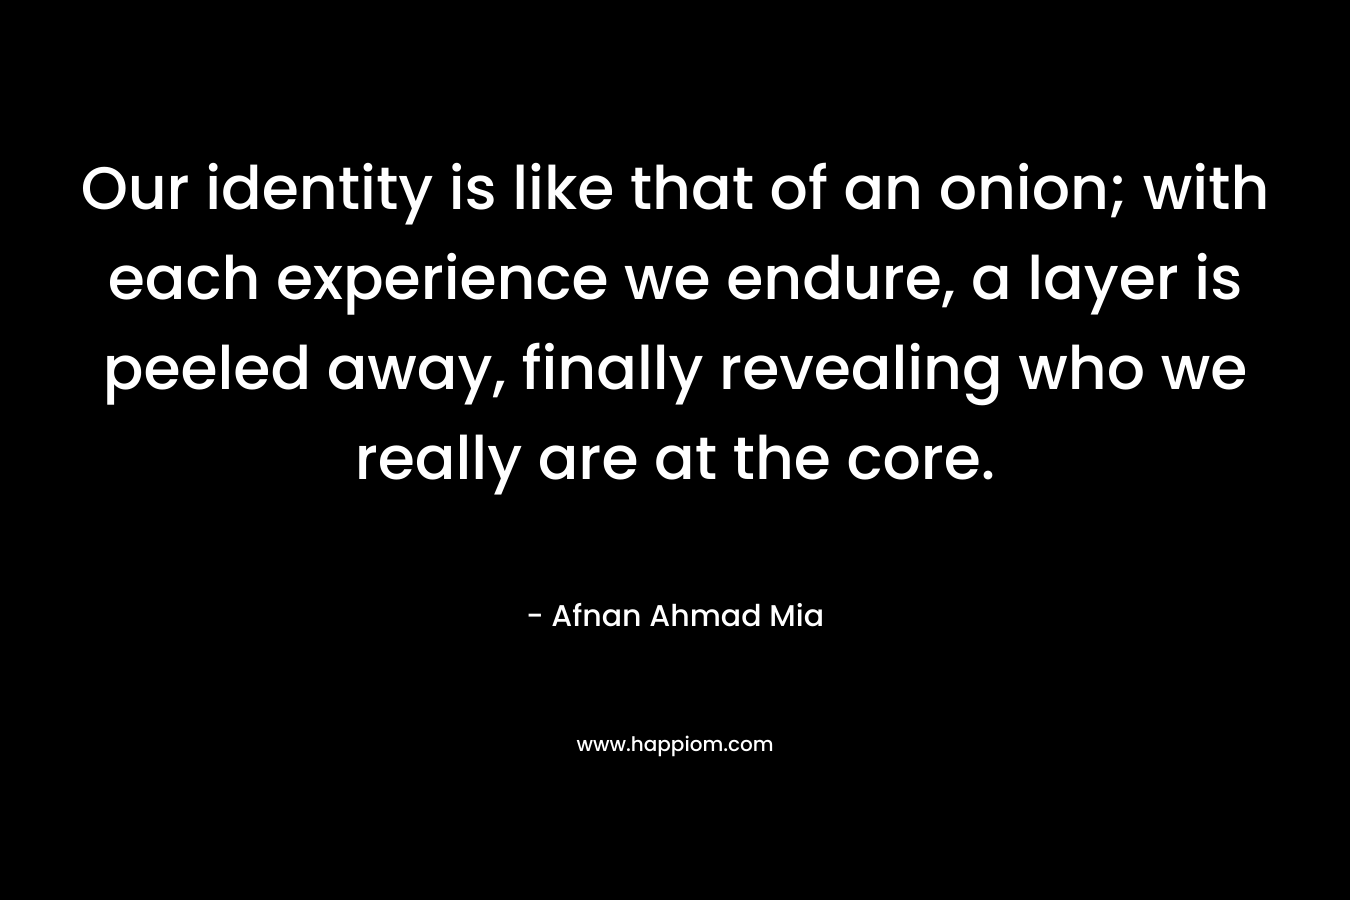 Our identity is like that of an onion; with each experience we endure, a layer is peeled away, finally revealing who we really are at the core.